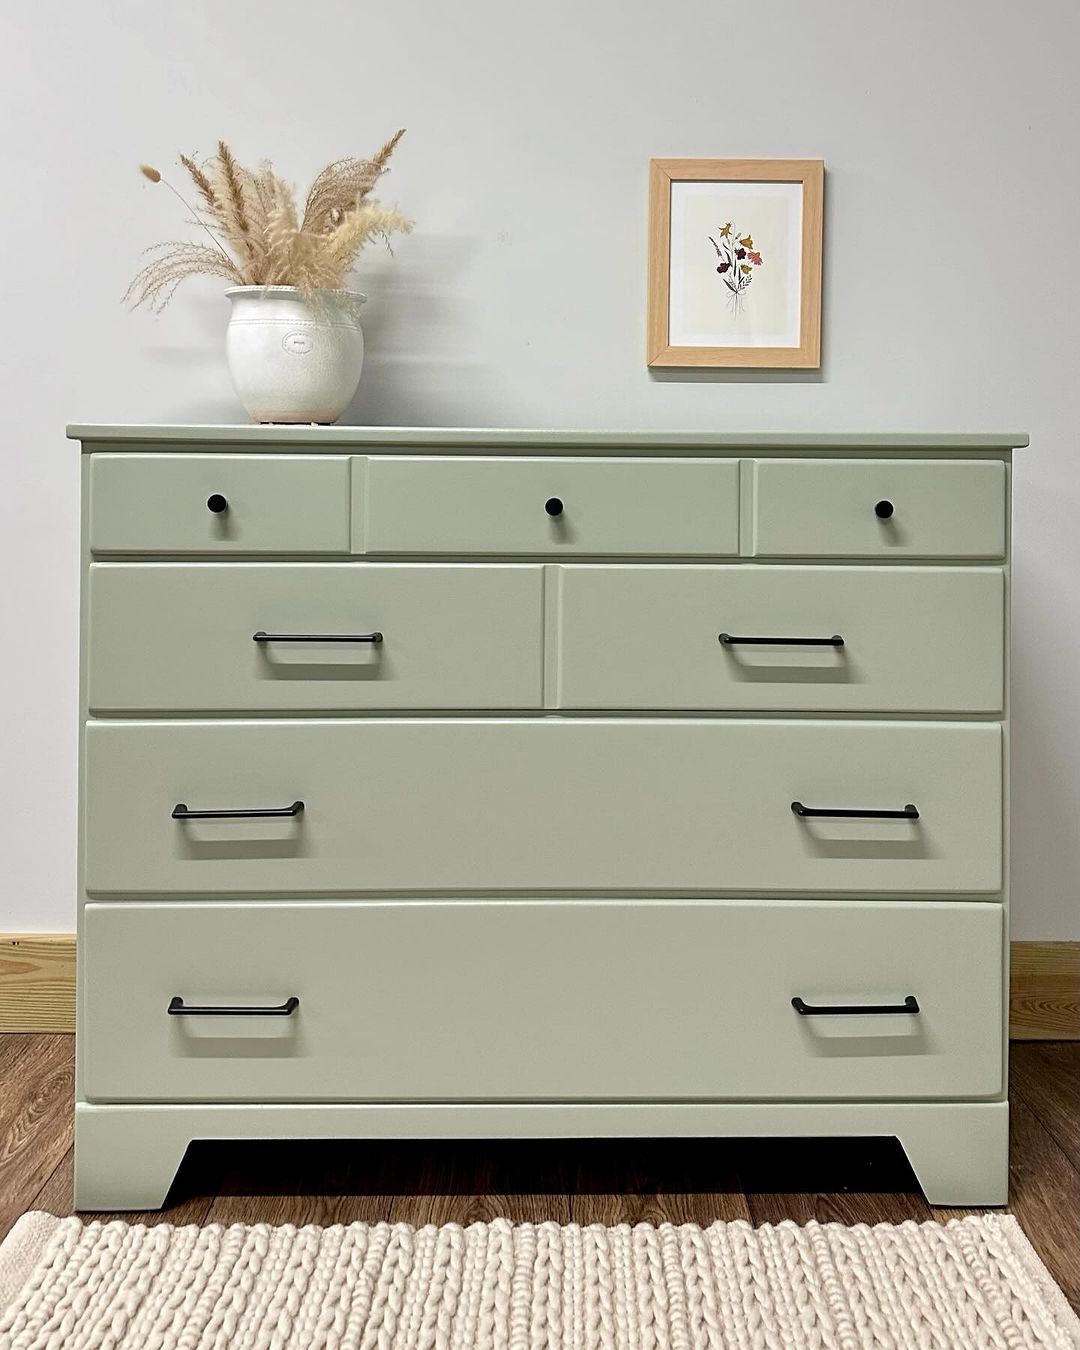 How to use Saybrook Sage HC-114 for the dresser_1